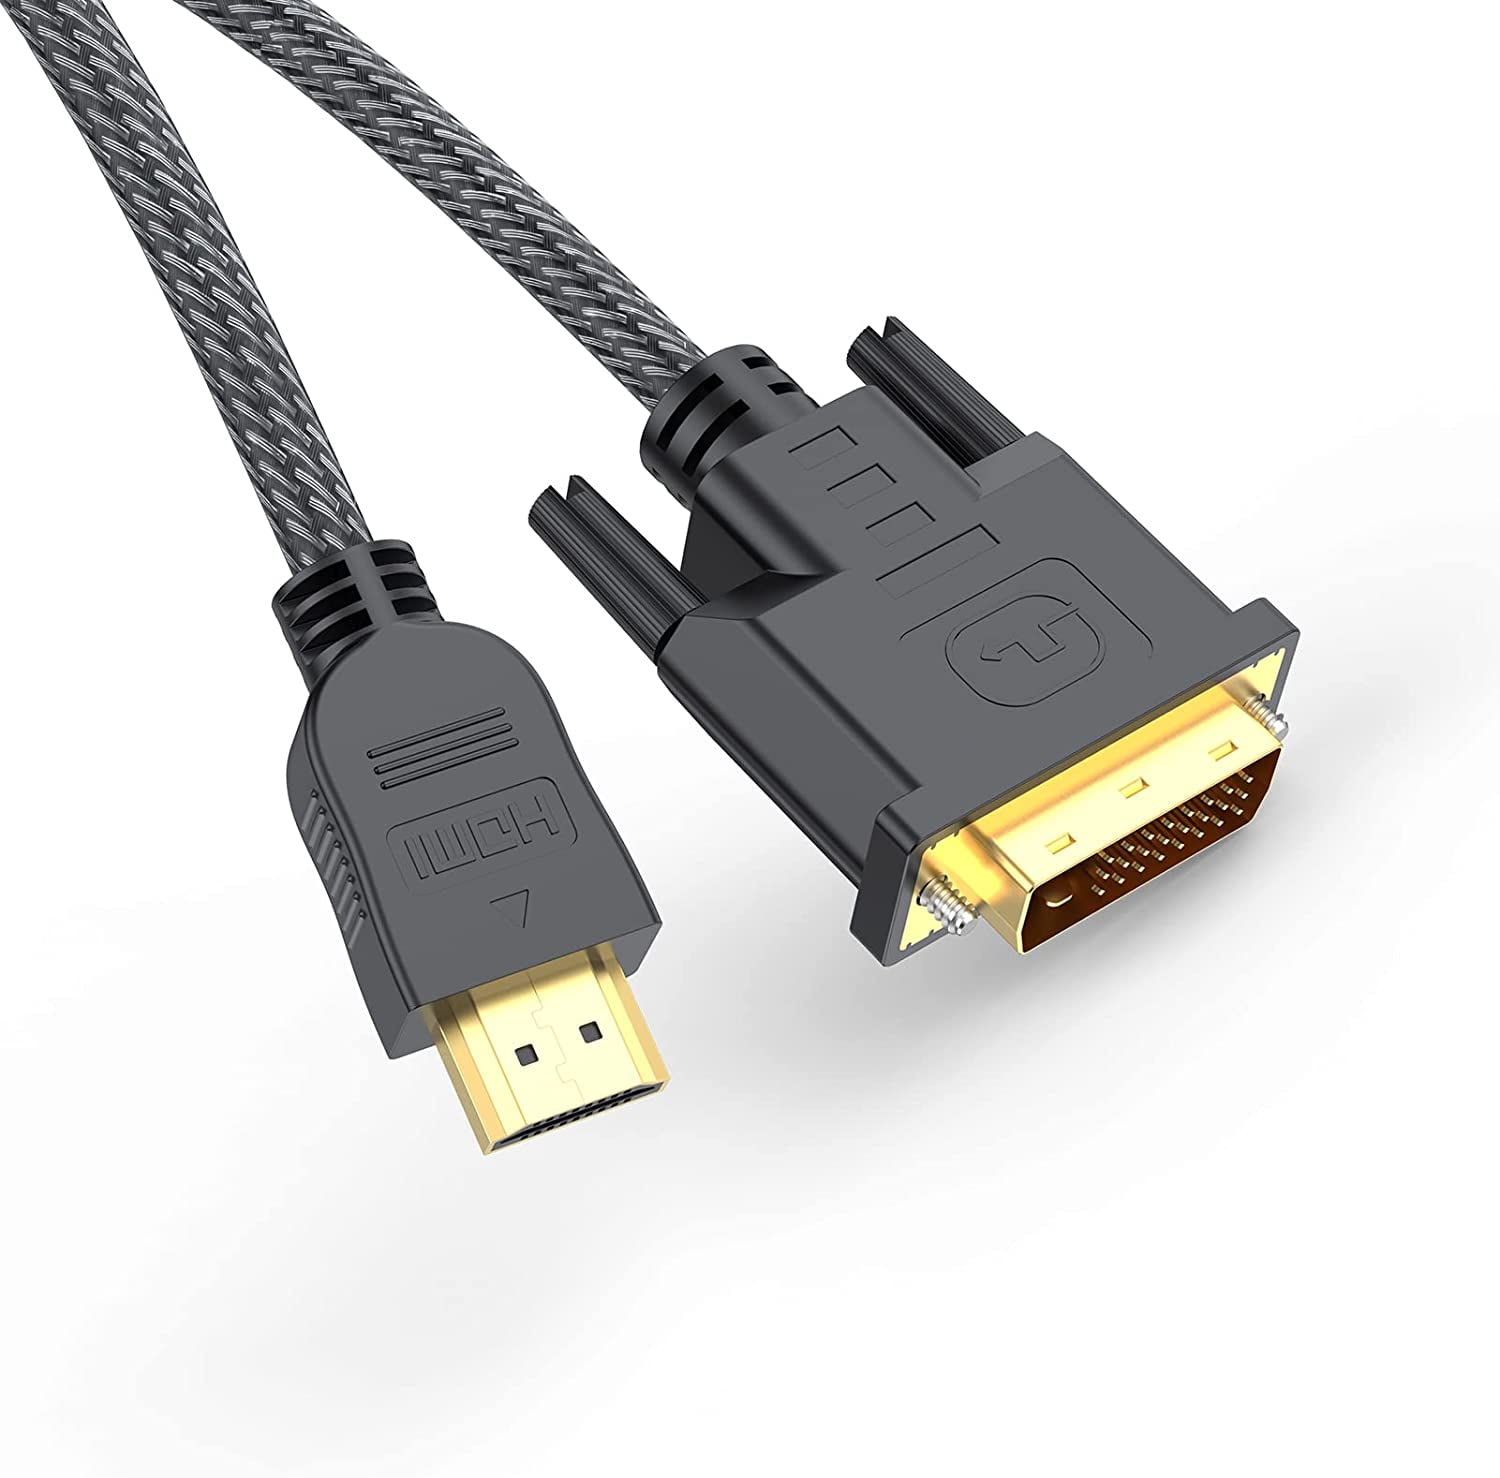 HDMI to DVI Cable 10FT, Bidirectional HDMI to DVI-D(24+1) DVI to HDMI to Male Adapter Cable 10' Bi-Directional Compatible for Raspberry Pi, Roku, Xbox One, PS4 Card -